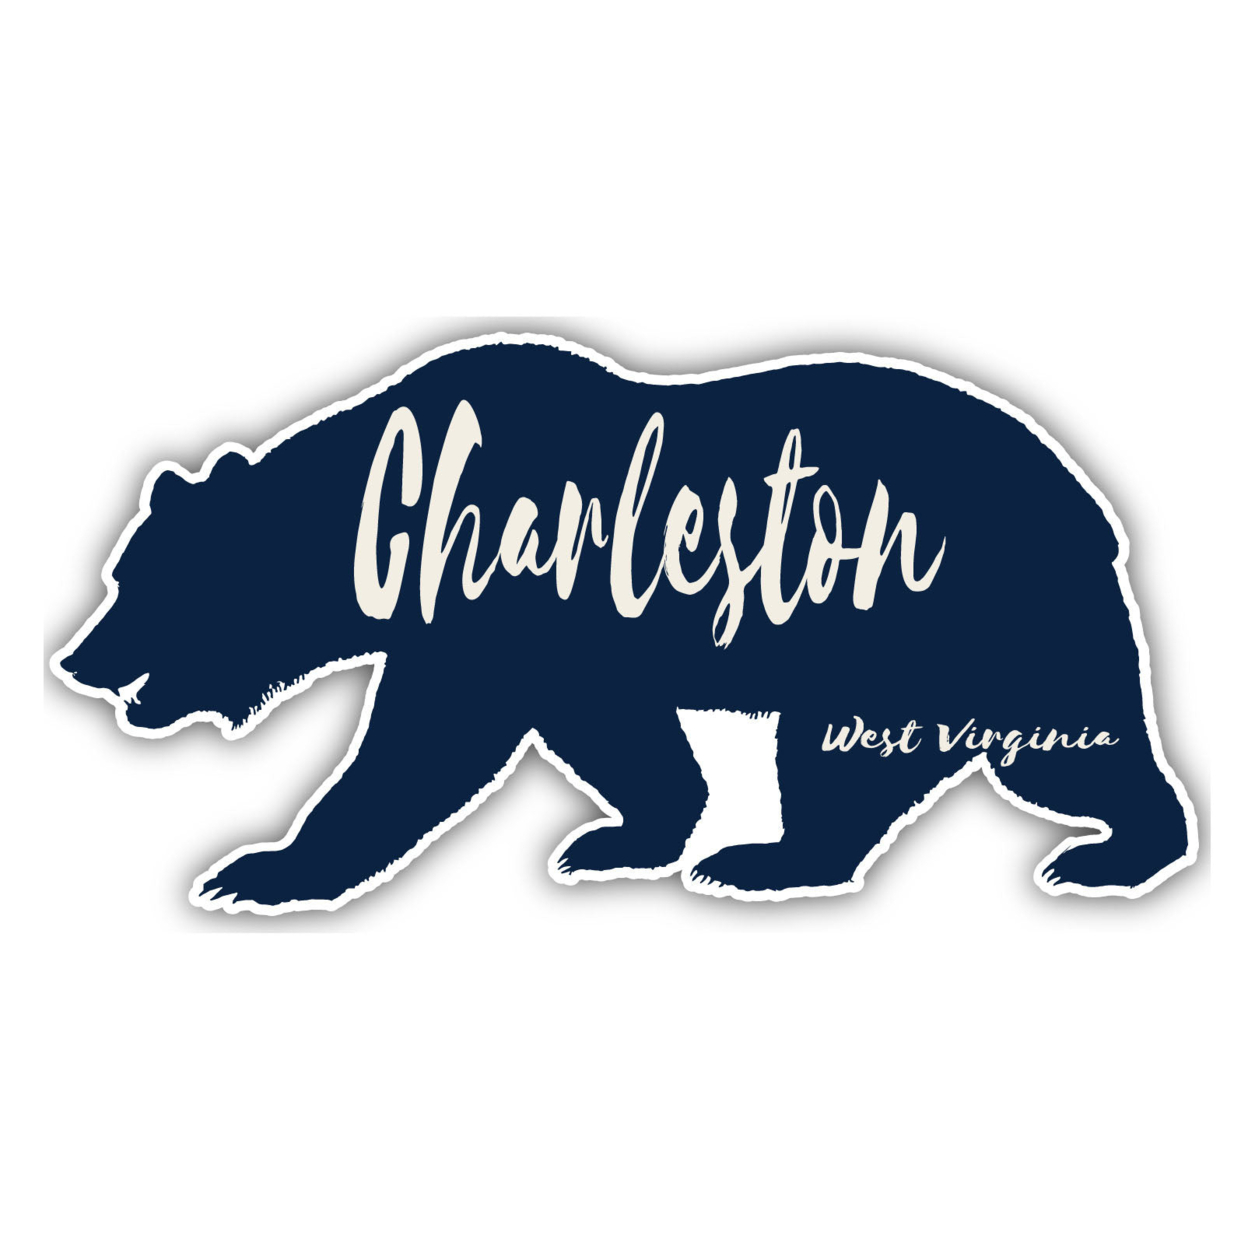 Charleston West Virginia Souvenir Decorative Stickers (Choose Theme And Size) - 4-Pack, 12-Inch, Tent